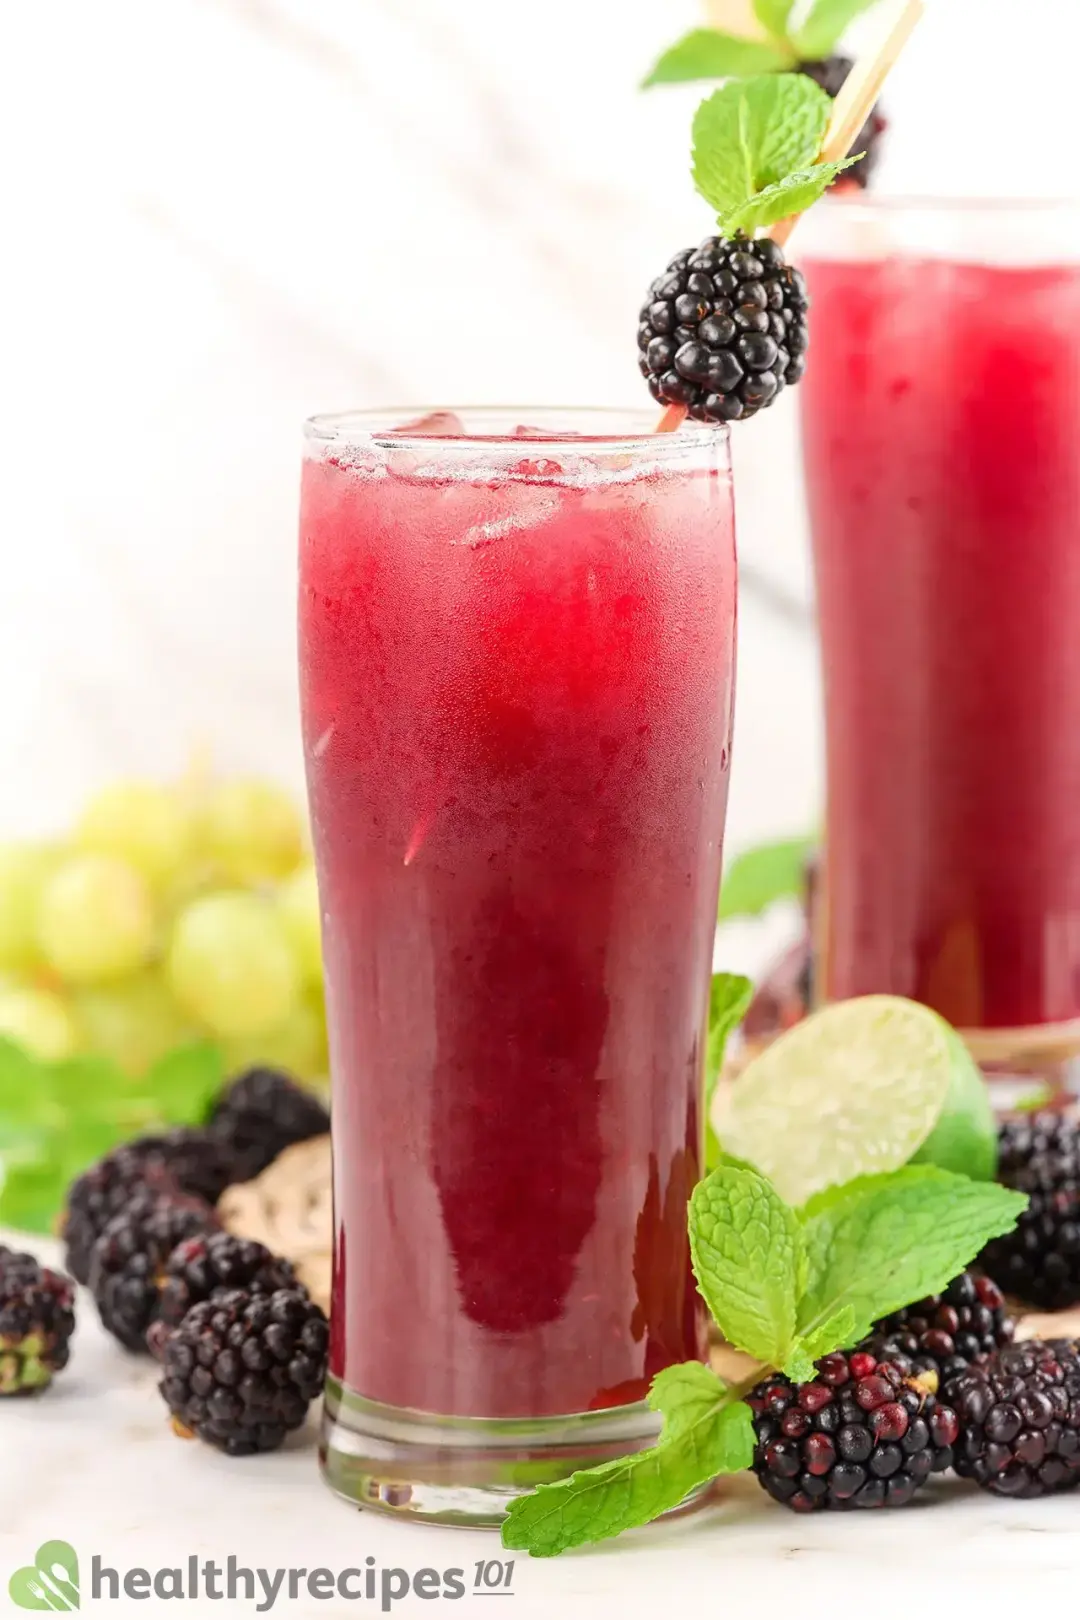 Two tall iced glasses of black berry juice drinks, garnished with mints and put next to grapes